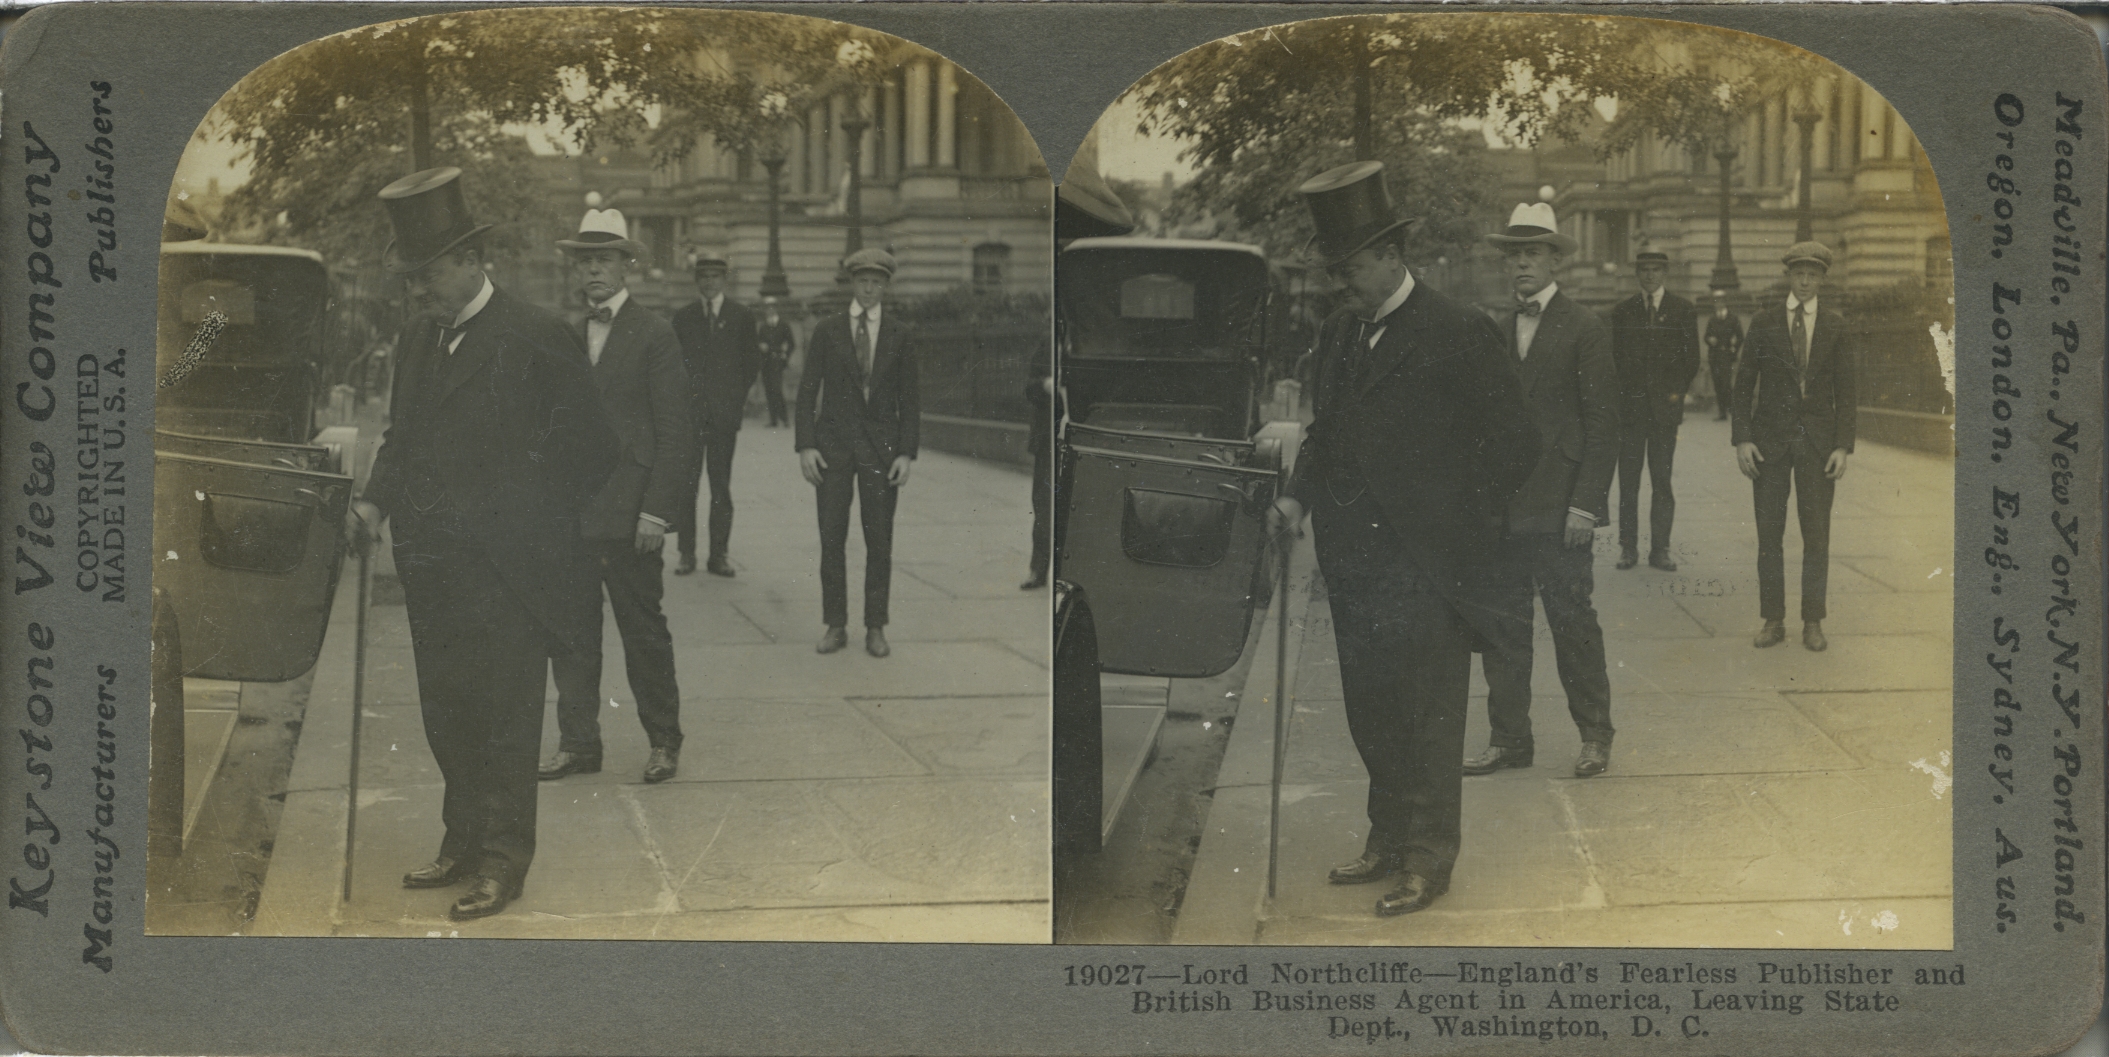 Lord Northcliffe - England's Fearless Publisher and British Business Agent in America, Leaving State Dept., Washingotn, D.C.